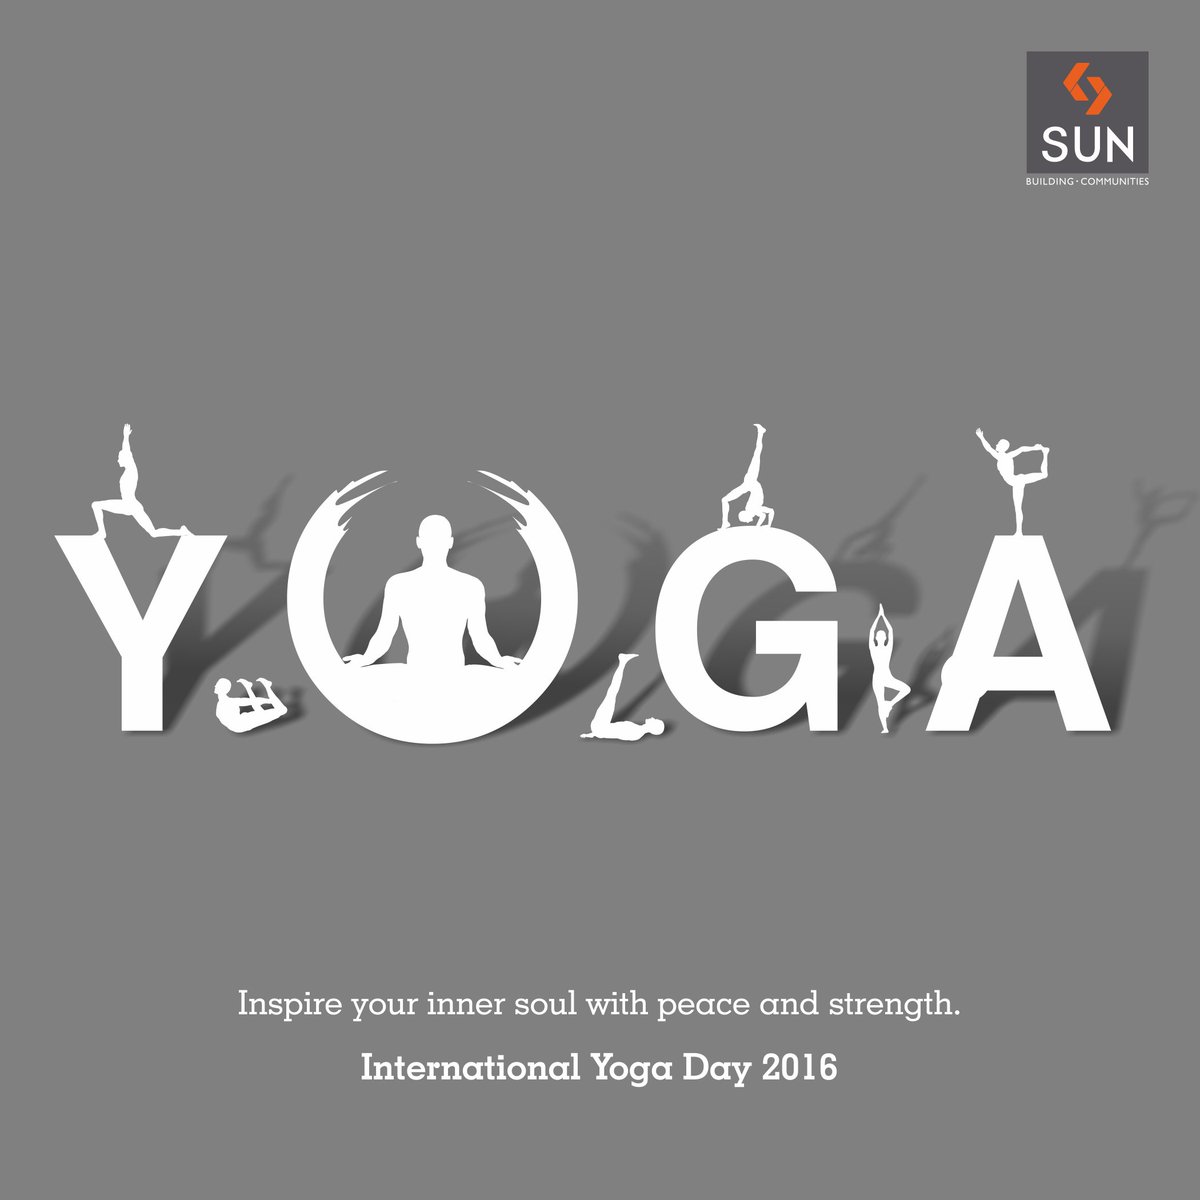 Let your inner strength connect with your mind and soul on this #InternationalYogaDay. https://t.co/Xlh9BdeELA